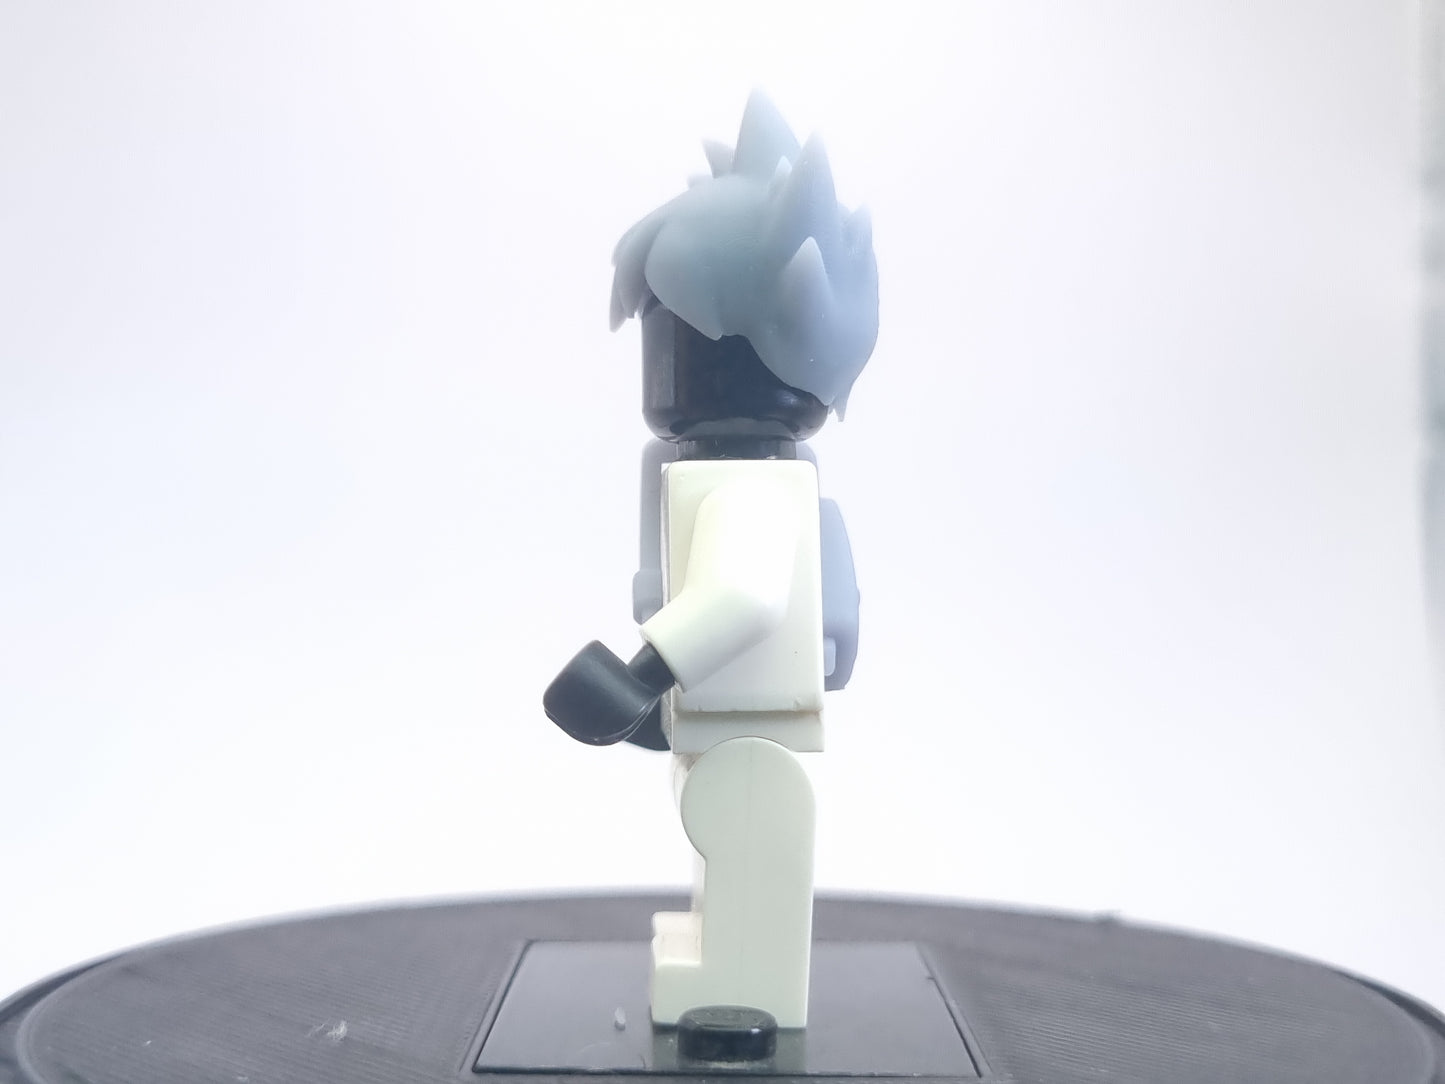 lego compatible 3D printed catcher with spikey hair!